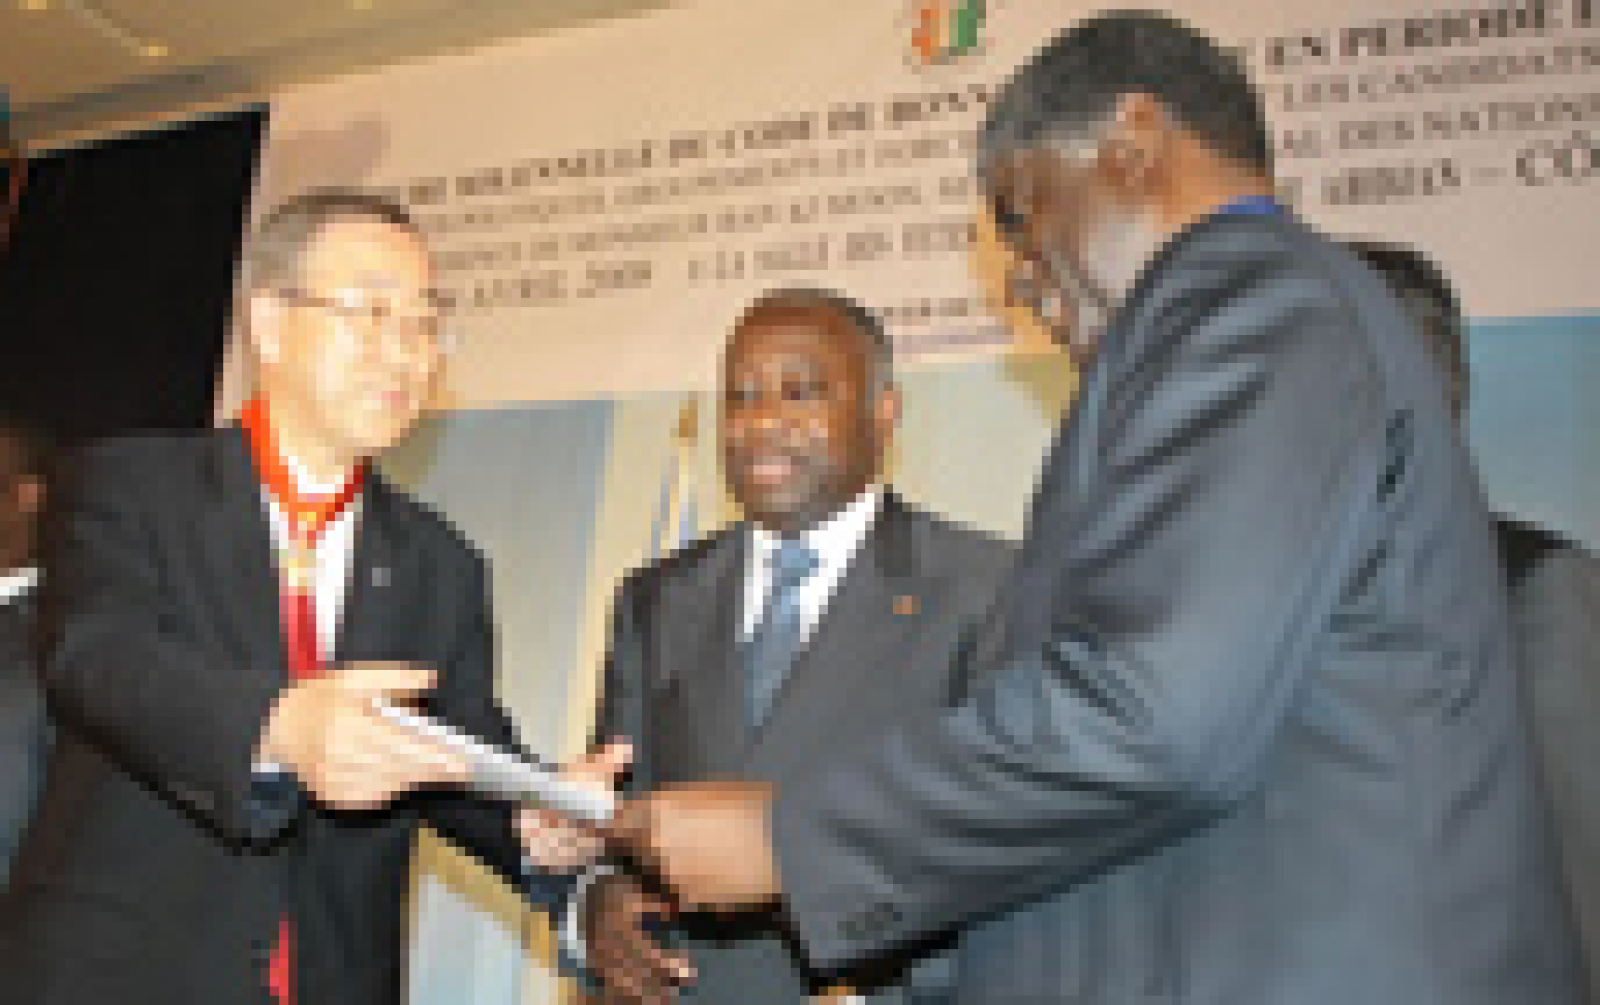 Côte d’Ivoire: NDI Helps Political Parties Agree to Code of Conduct